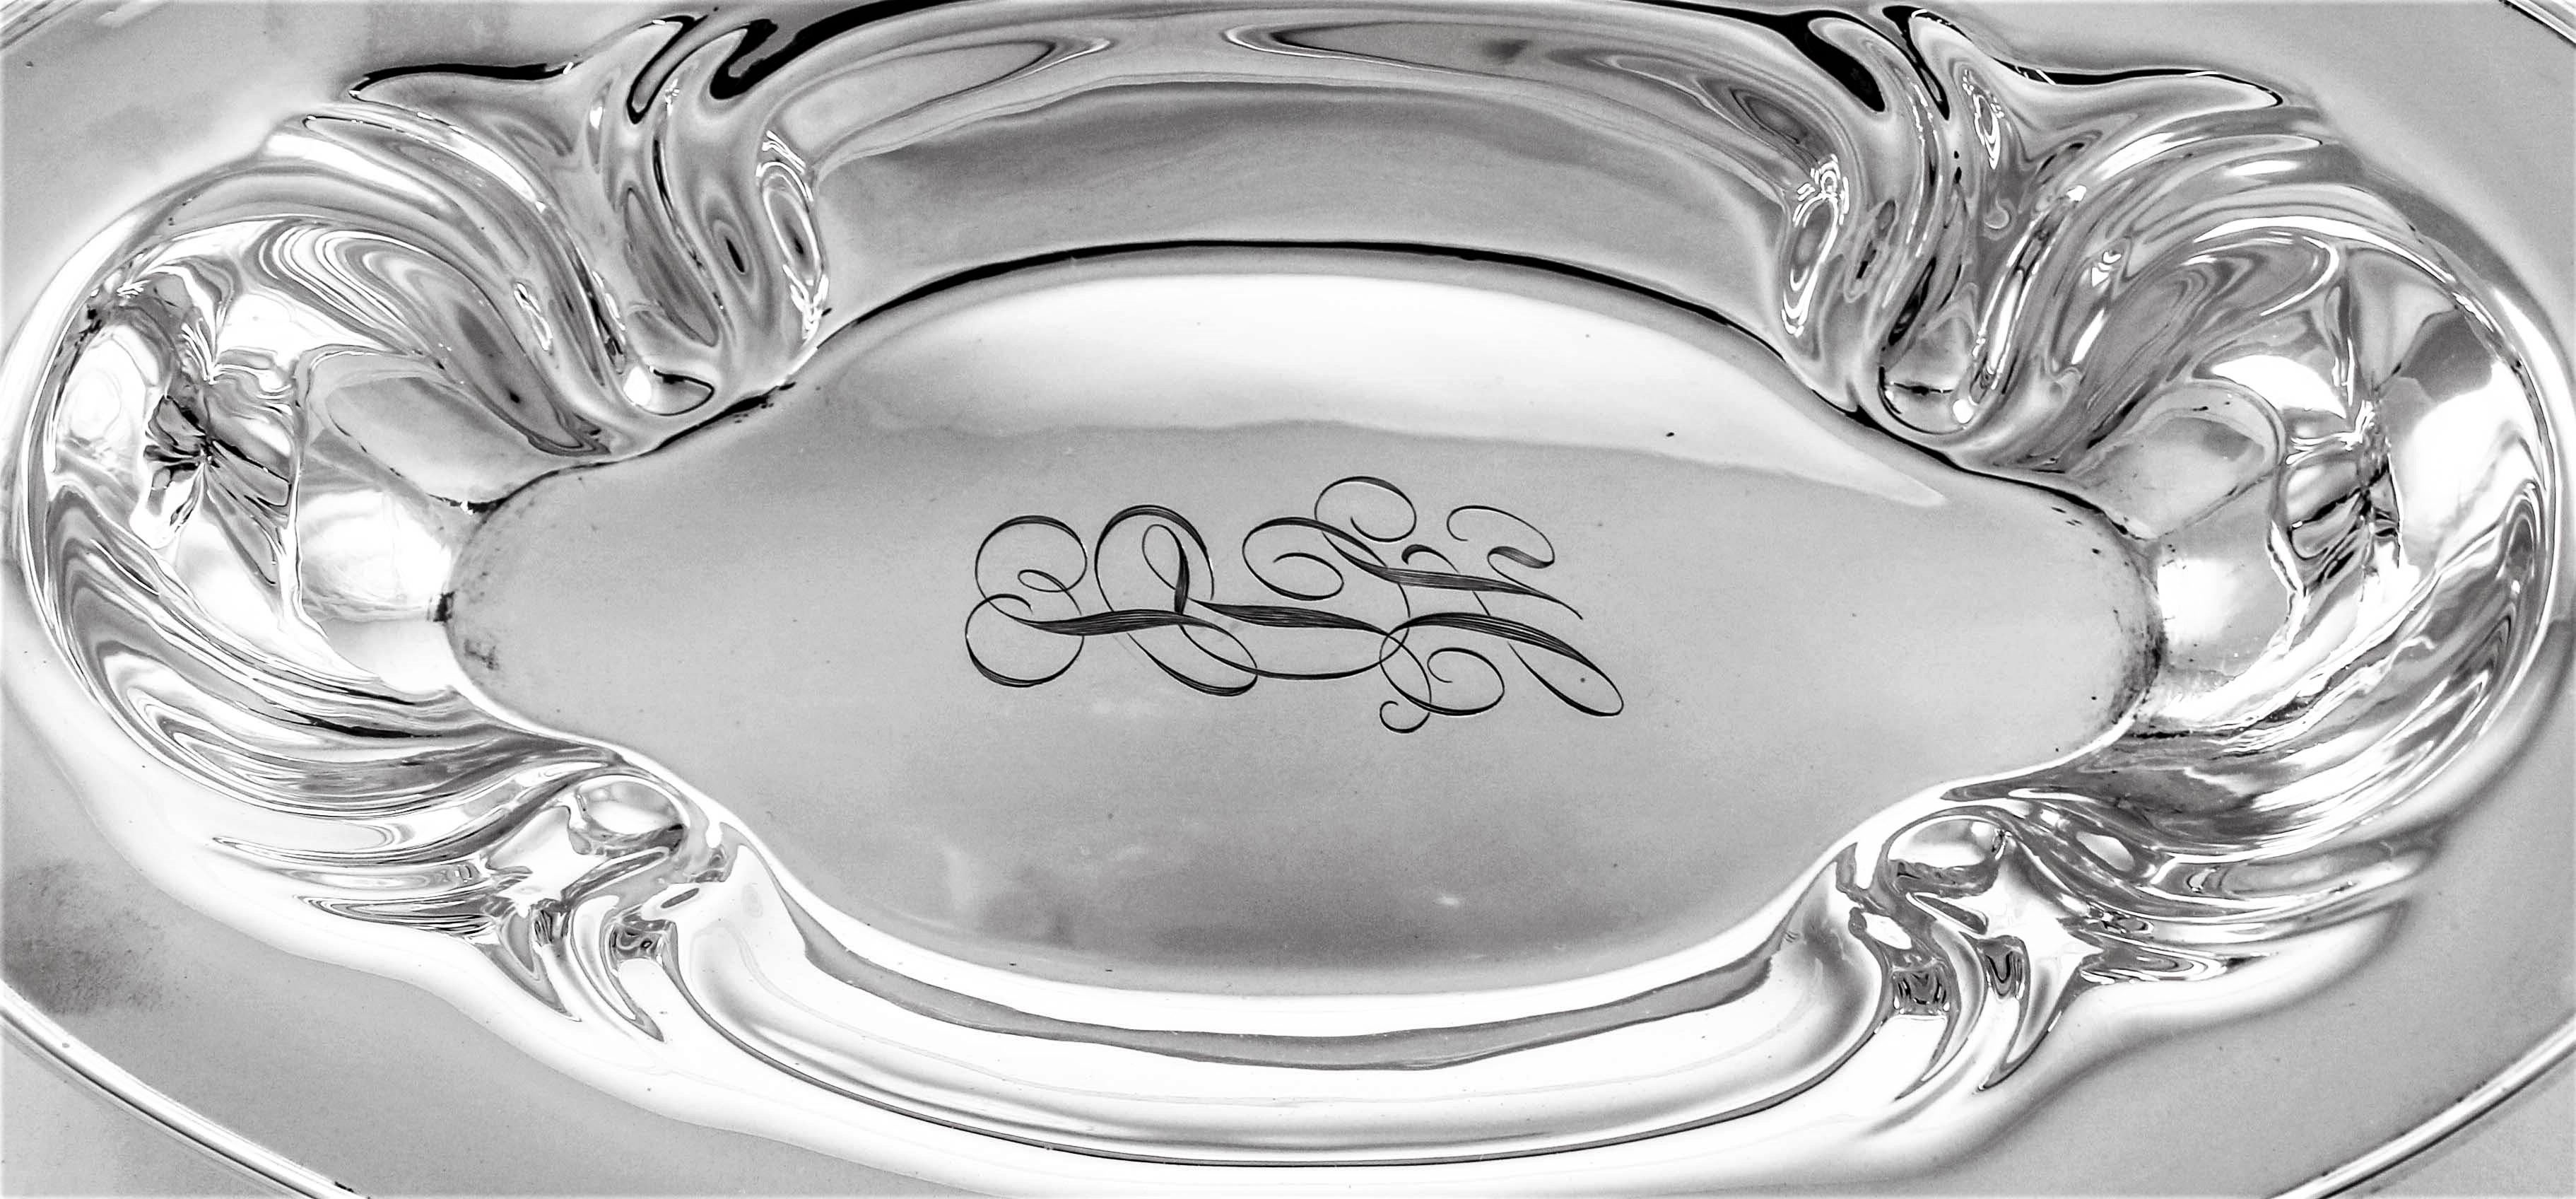 Sometimes less is more and here’s a fine example. This lovely midcentury sterling breadbasket. A simple form and a modern clean look. The inner rim is scalloped and there’s a hand engraved monogram in the centre. You’ll never need a special occasion